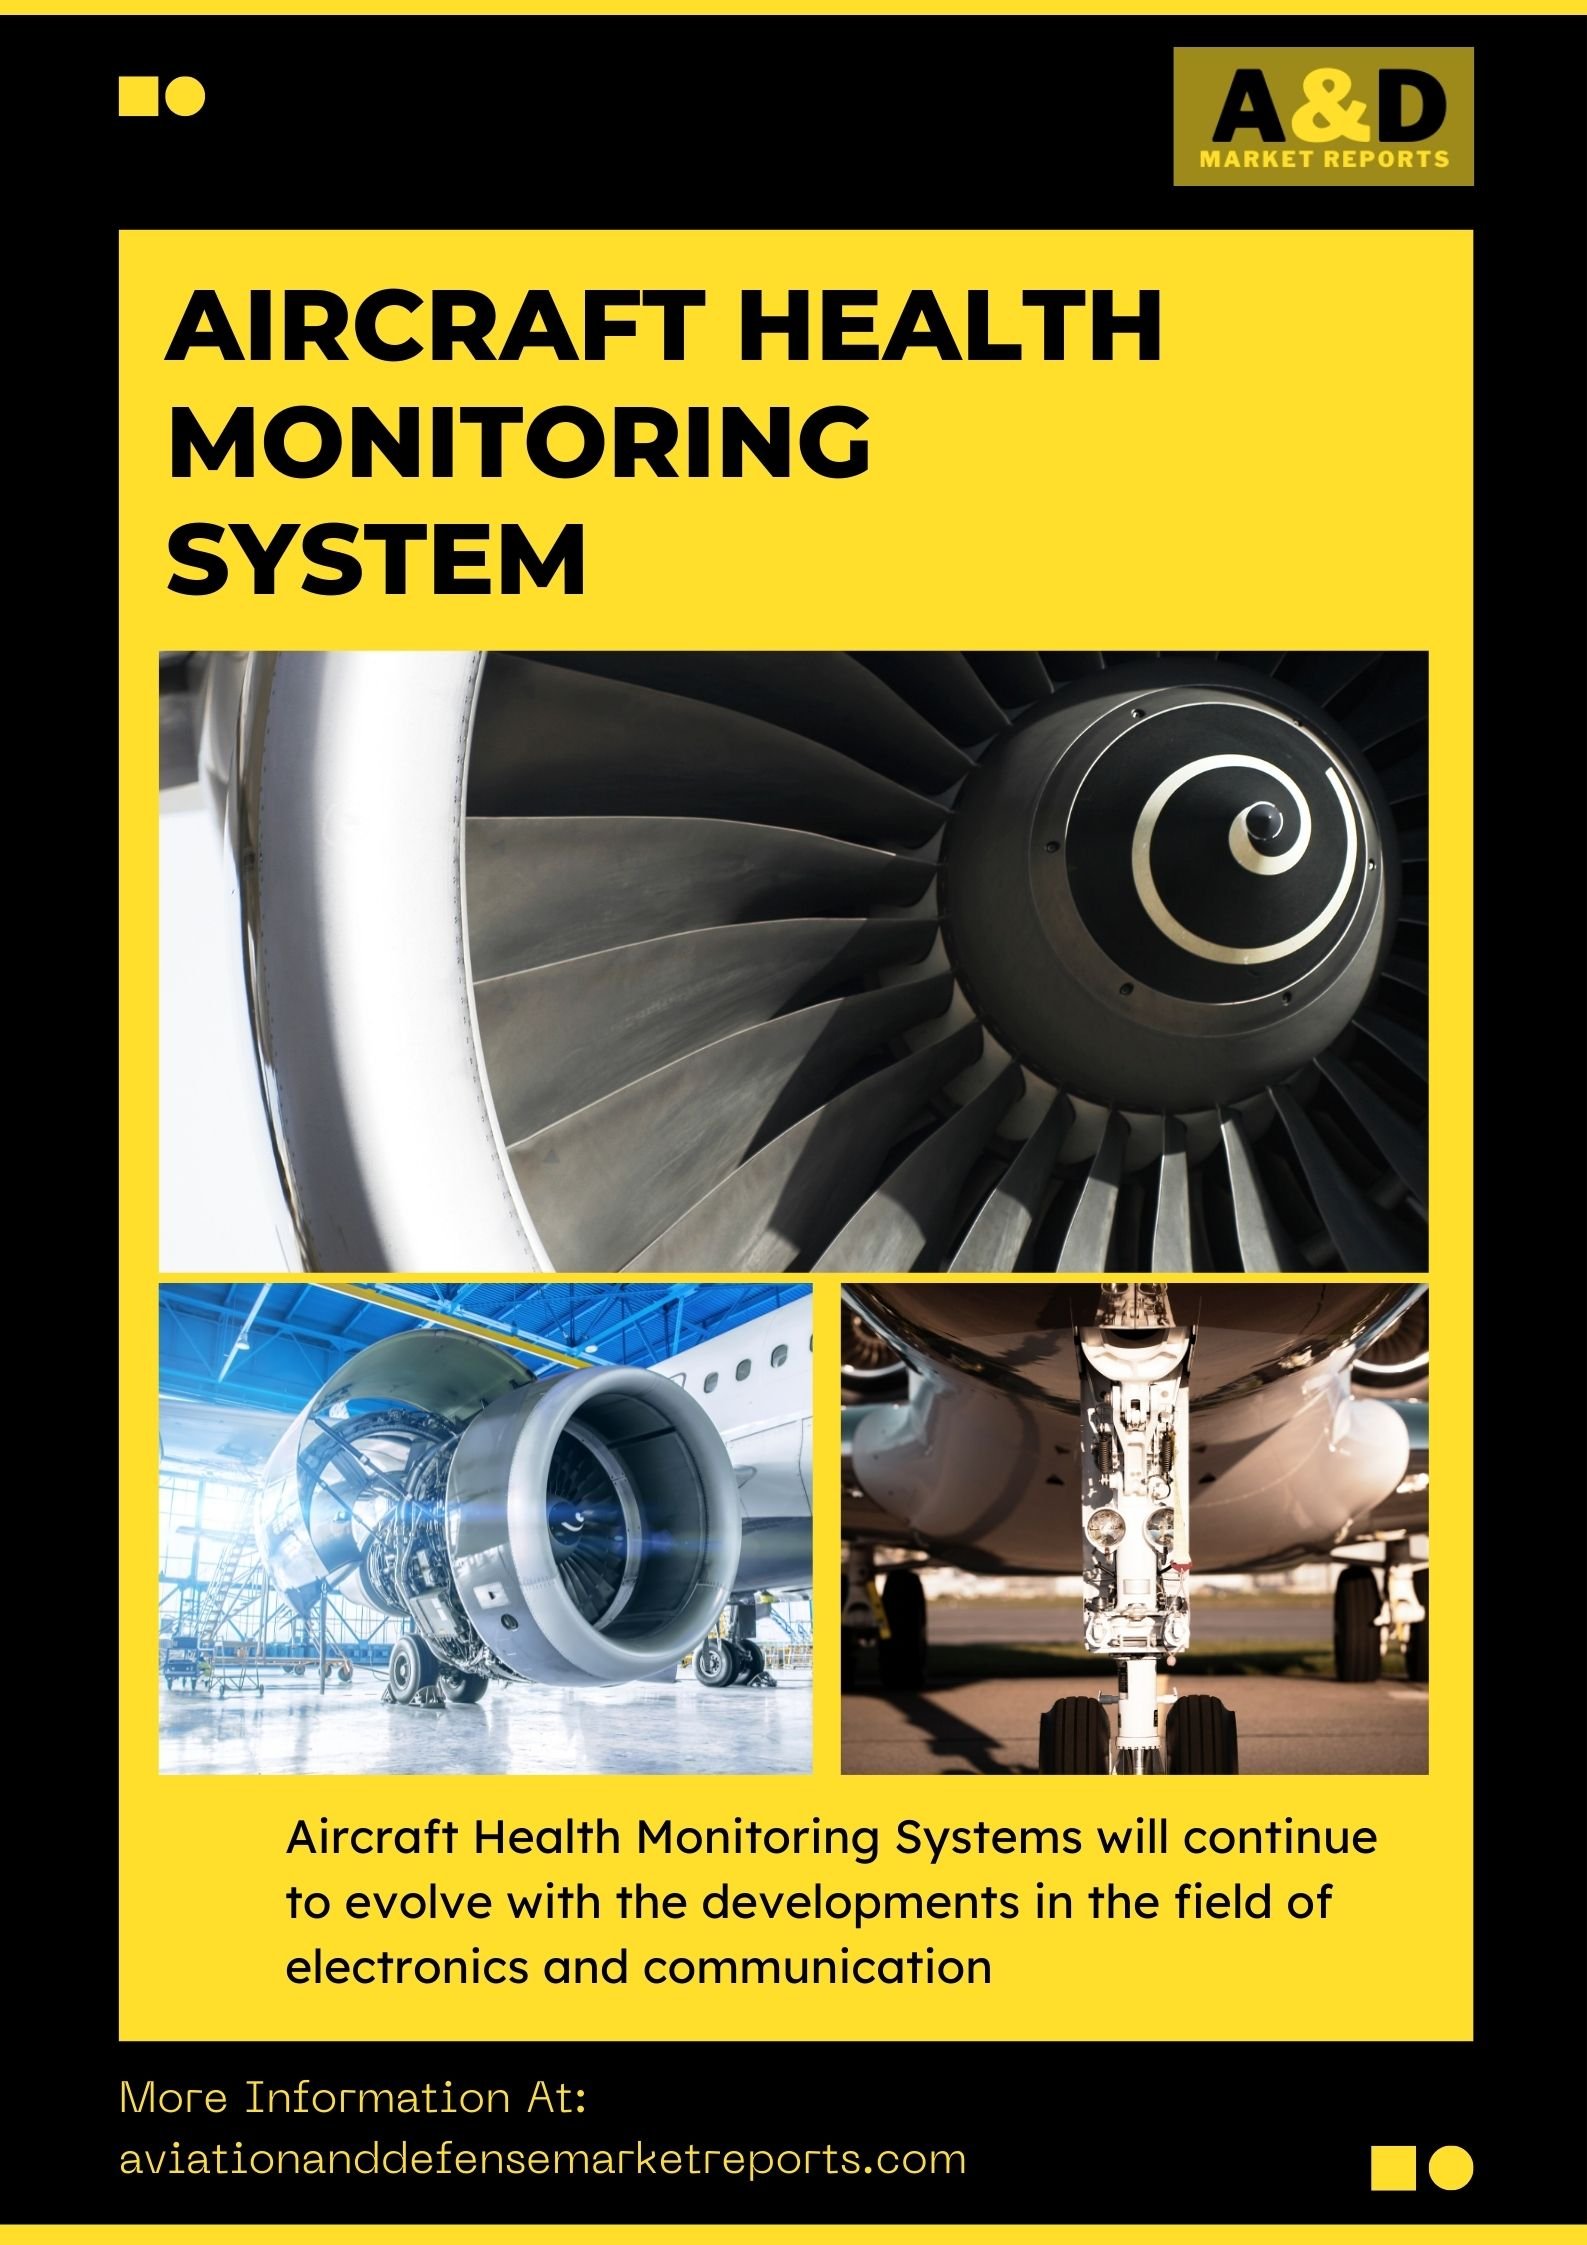 Versatility of Aircraft Health Monitoring System